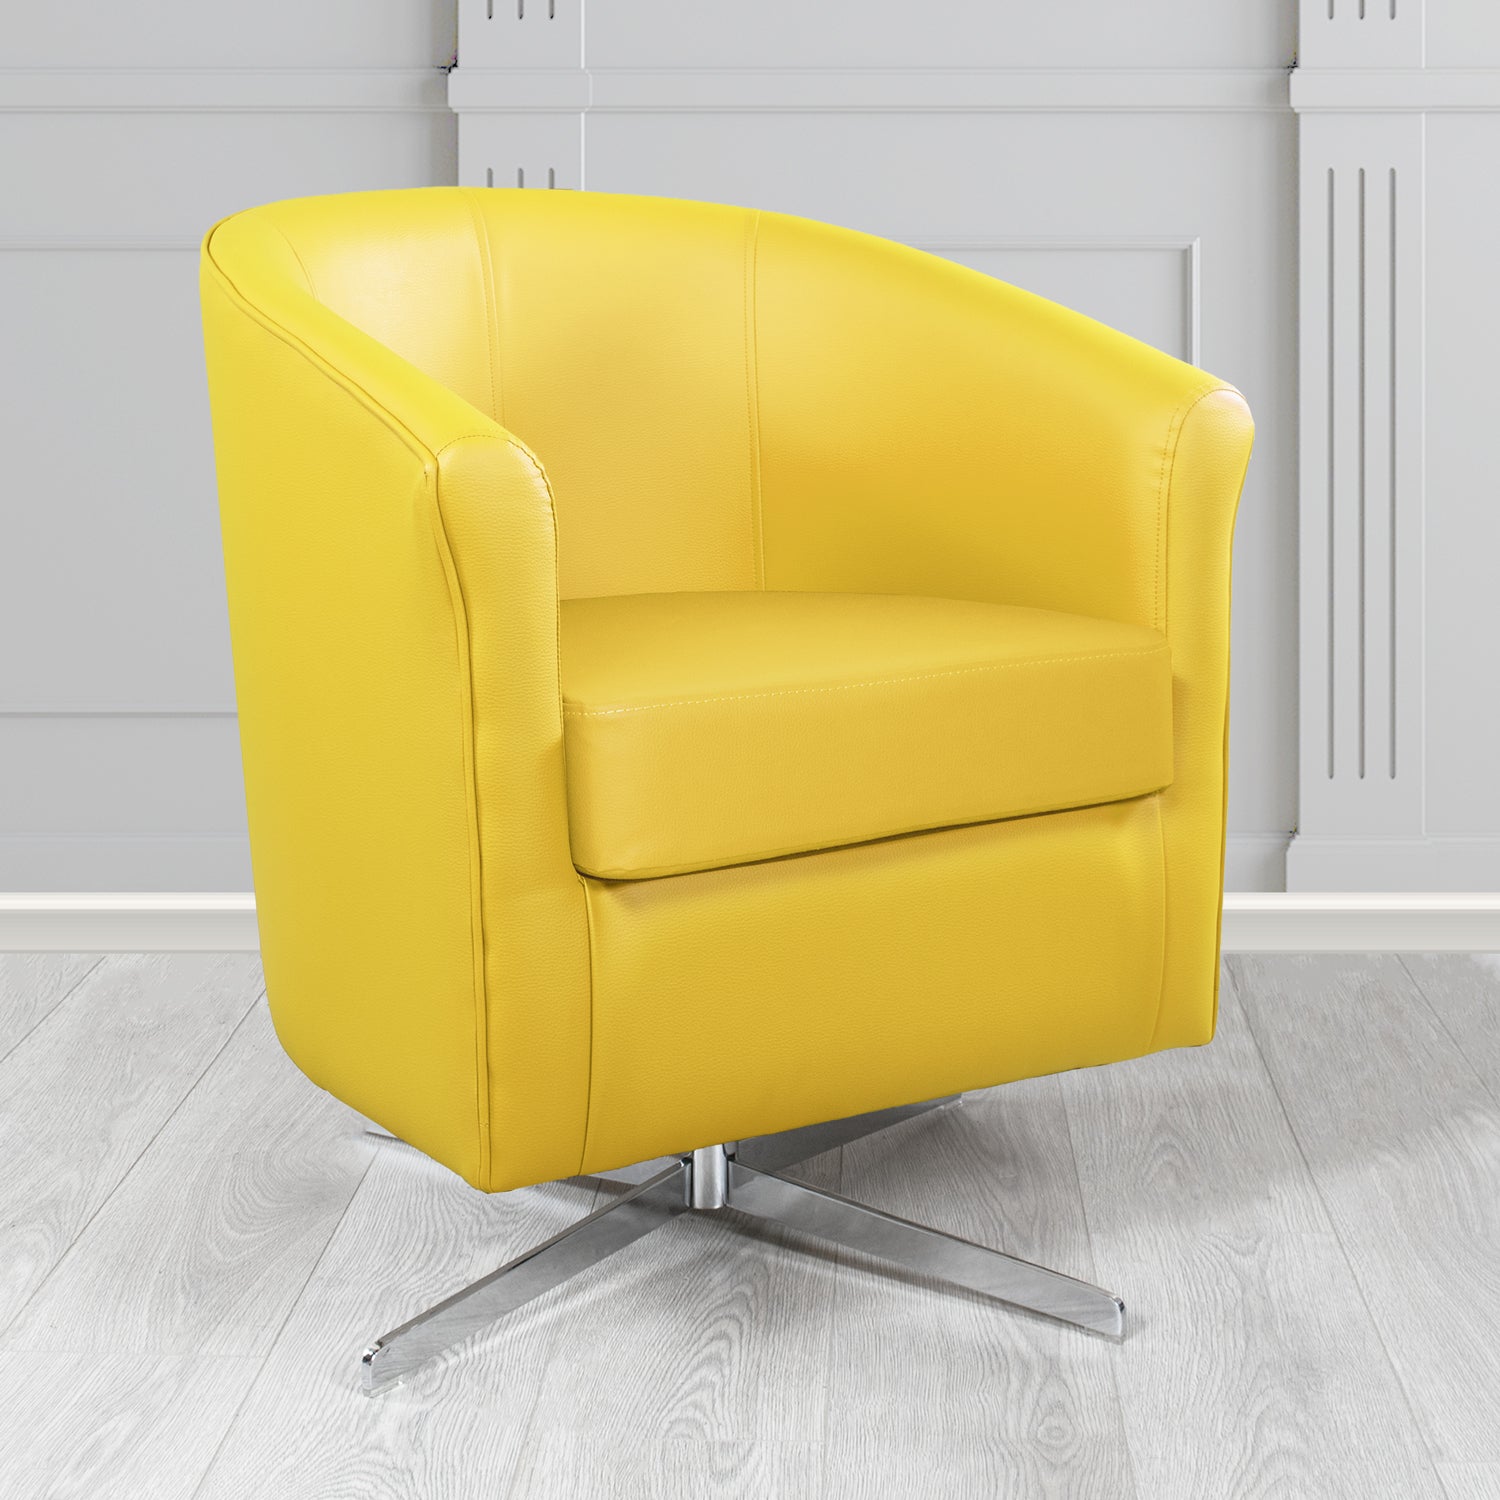 Cannes Swivel Tub Chair in Just Colour Marigold Crib 5 Faux Leather - The Tub Chair Shop